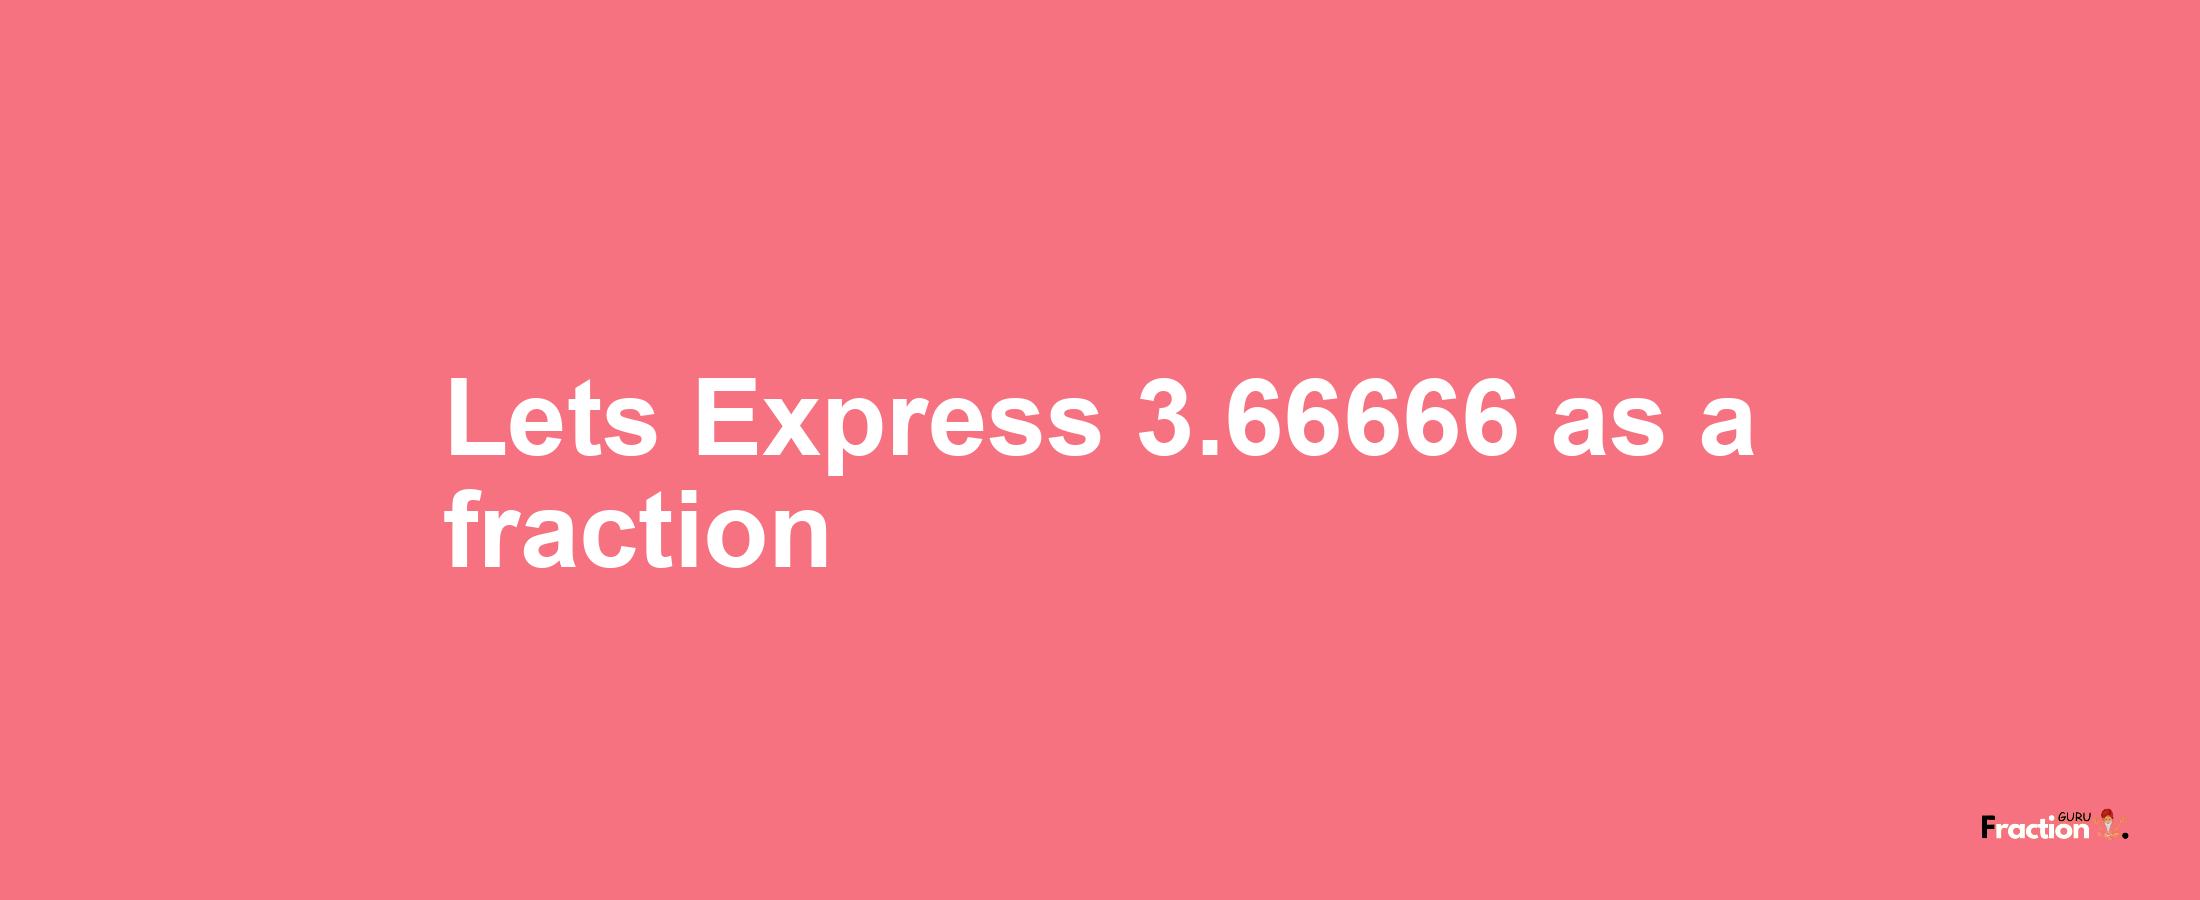 Lets Express 3.66666 as afraction